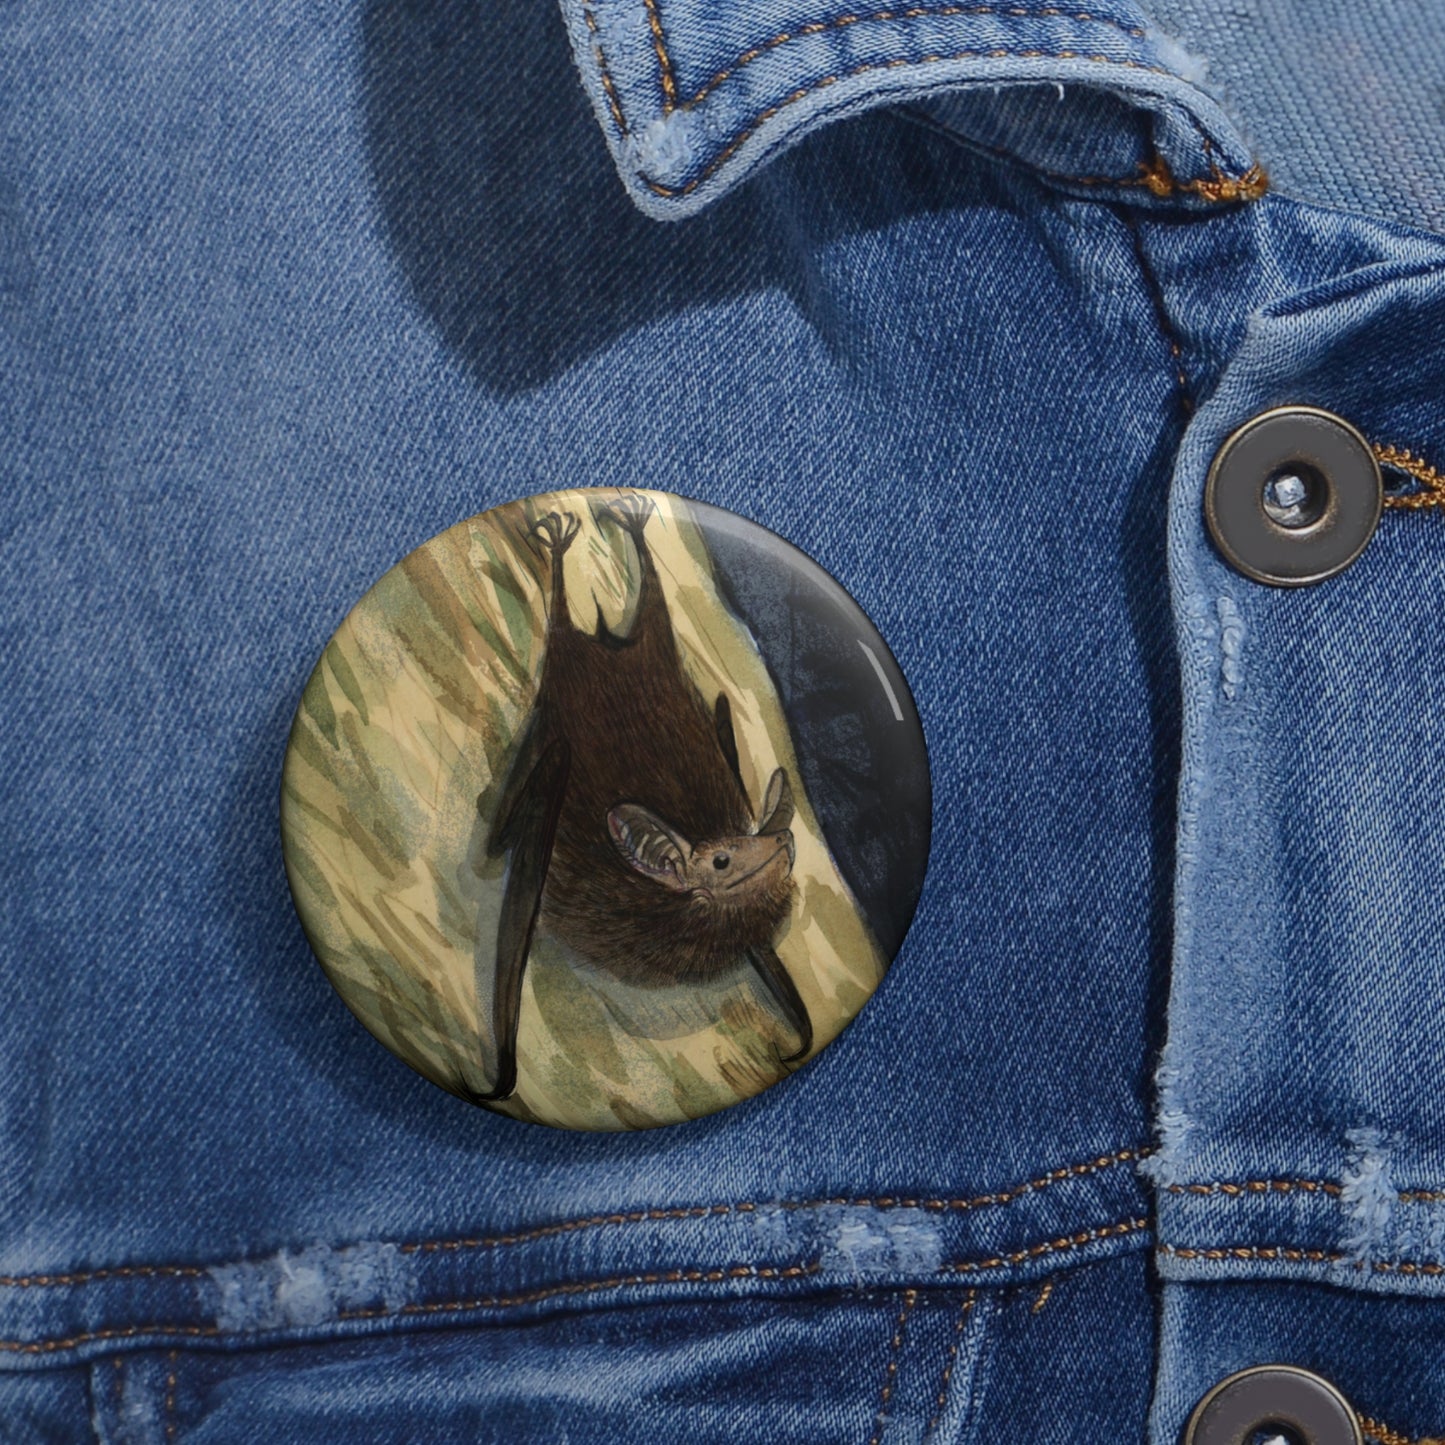 Save their Forest - Pin Button